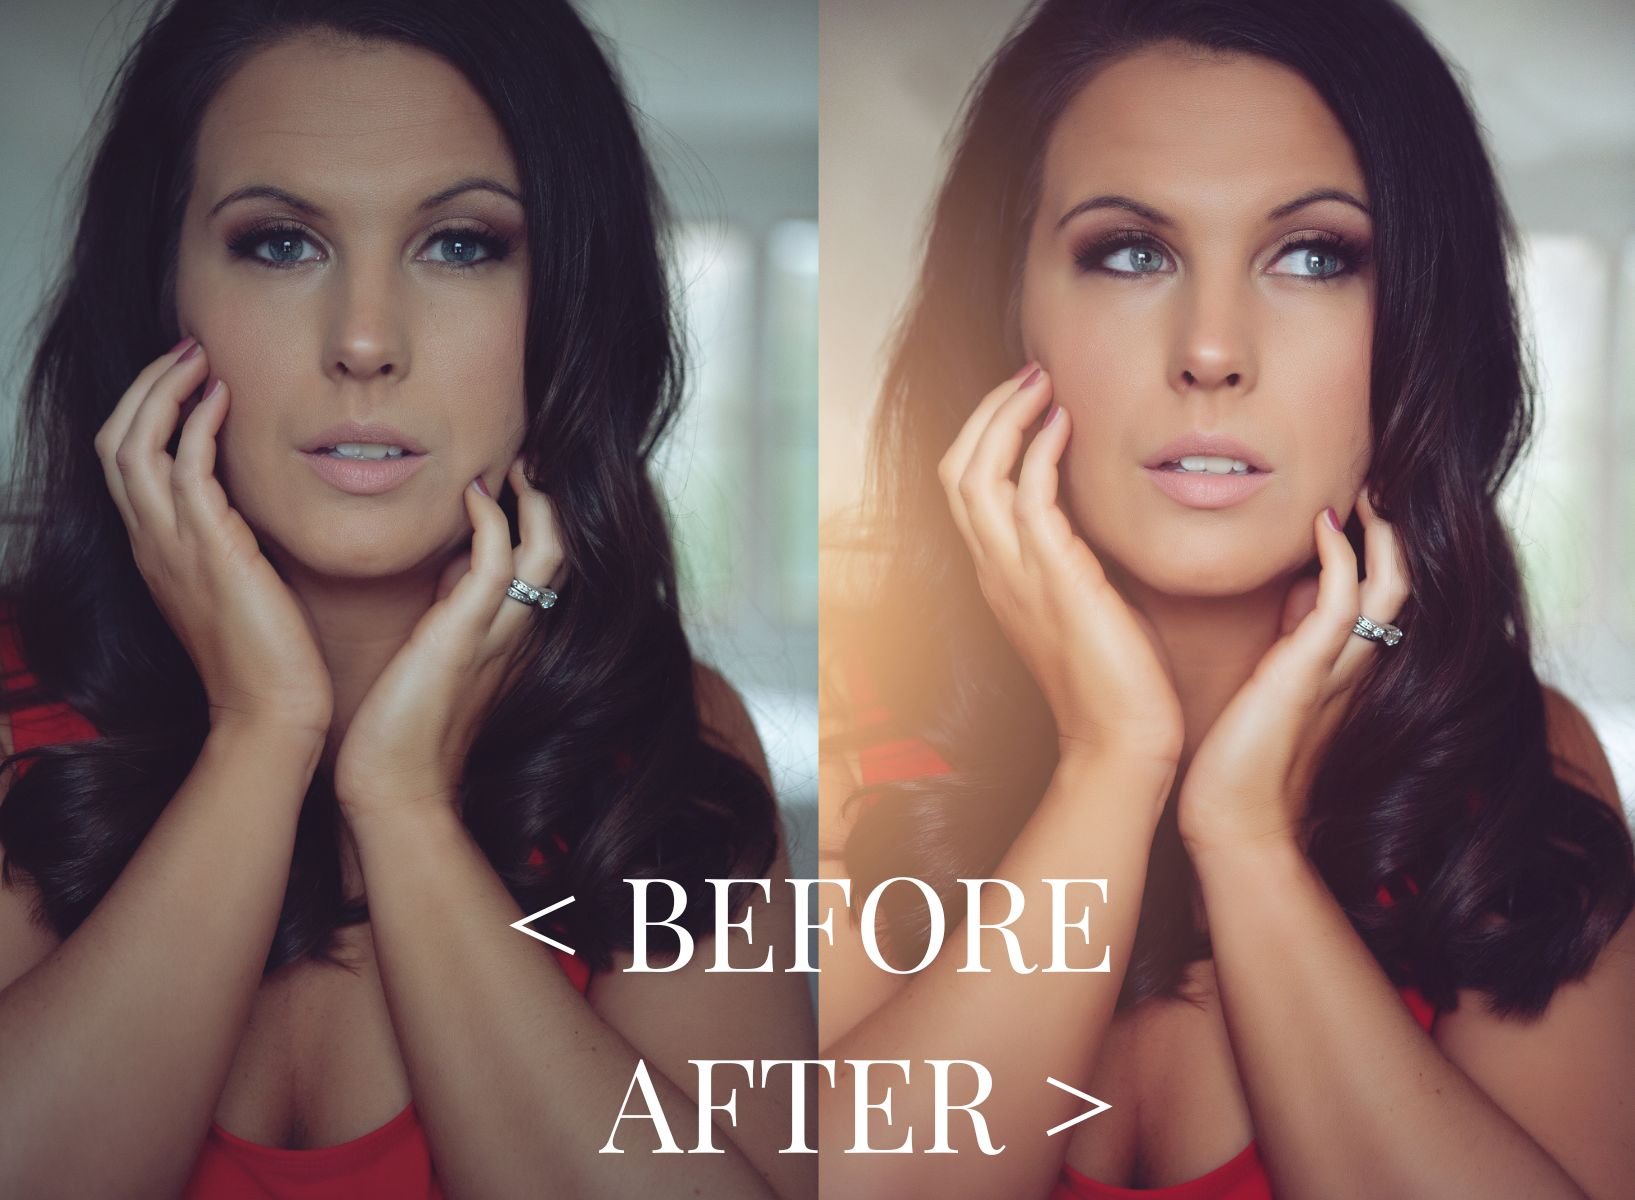 BEFORE AND AFTER EDITING LUXURY BOUDOIR PHOTOSHOOT